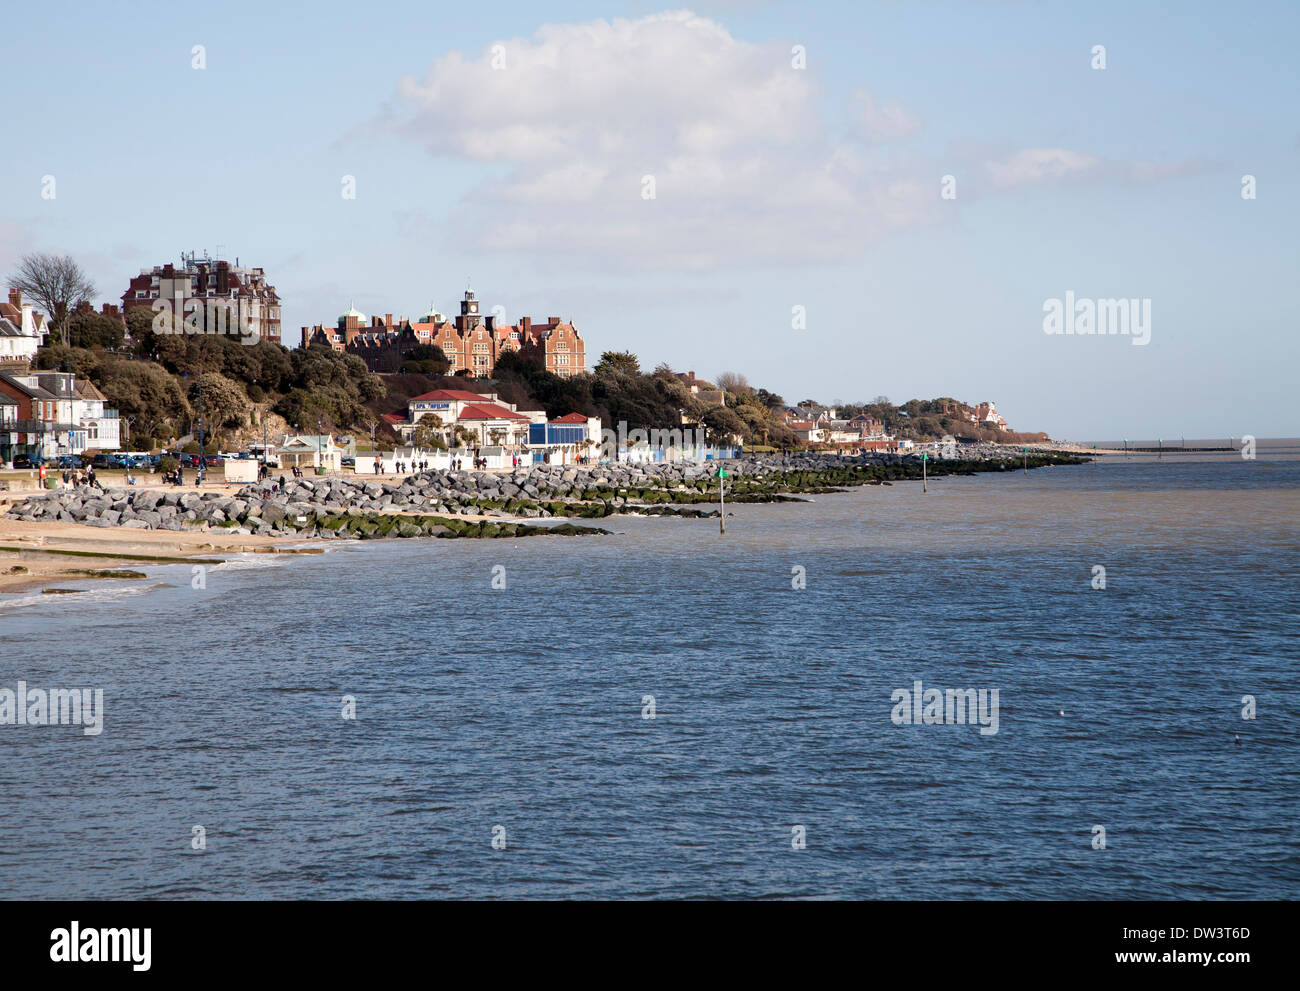 Rock armour sea defences and historic buildings on the seafront on a sunny day in winter at Felixstowe, Suffolk, England Stock Photo